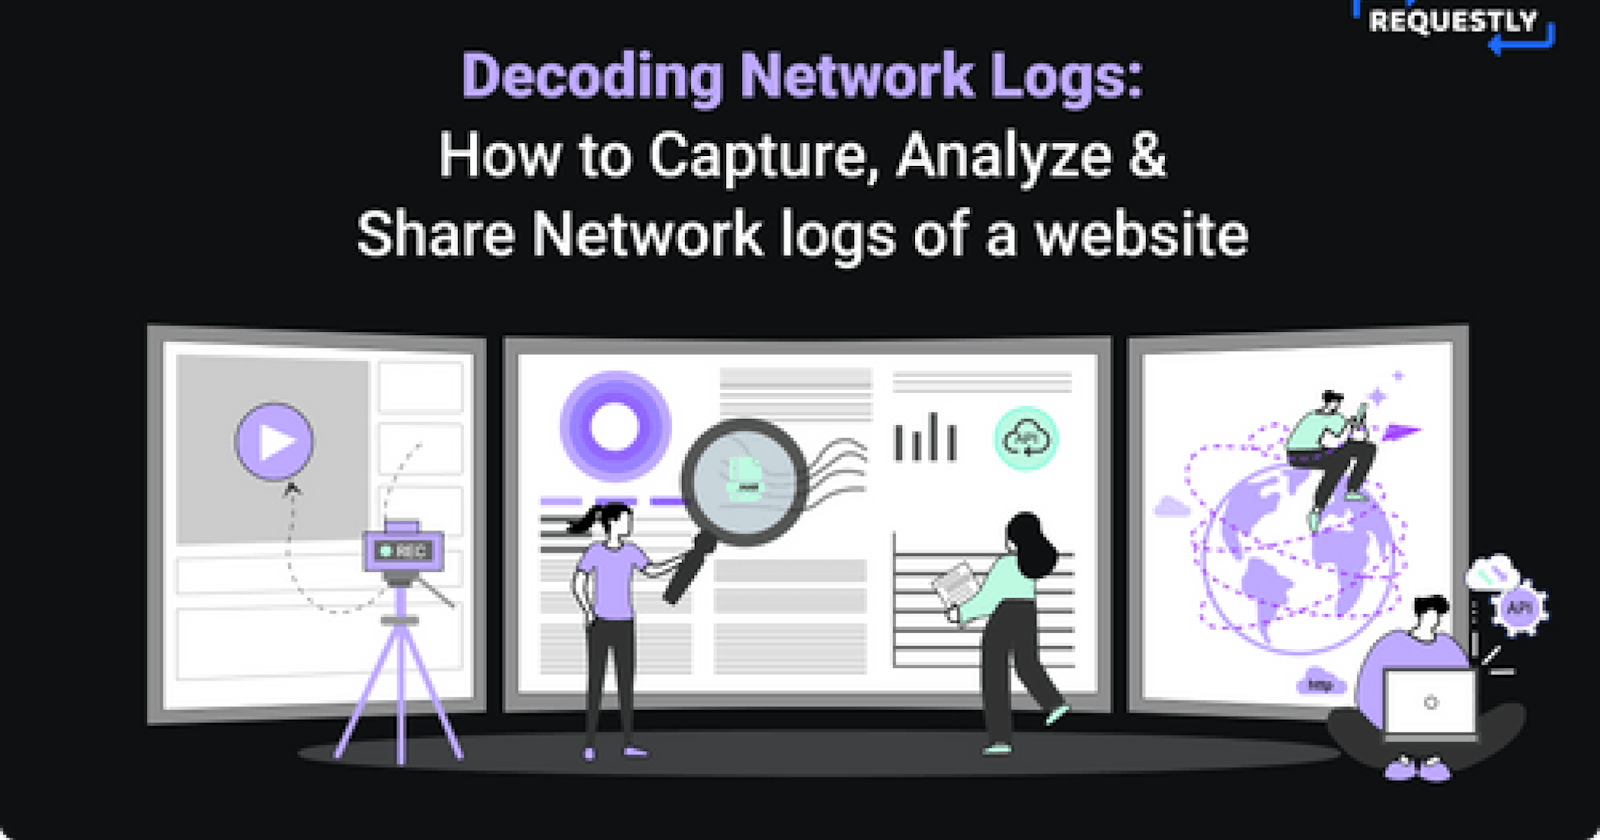 Decoding Network Logs: How to Capture, Analyze & Share Network logs of a website